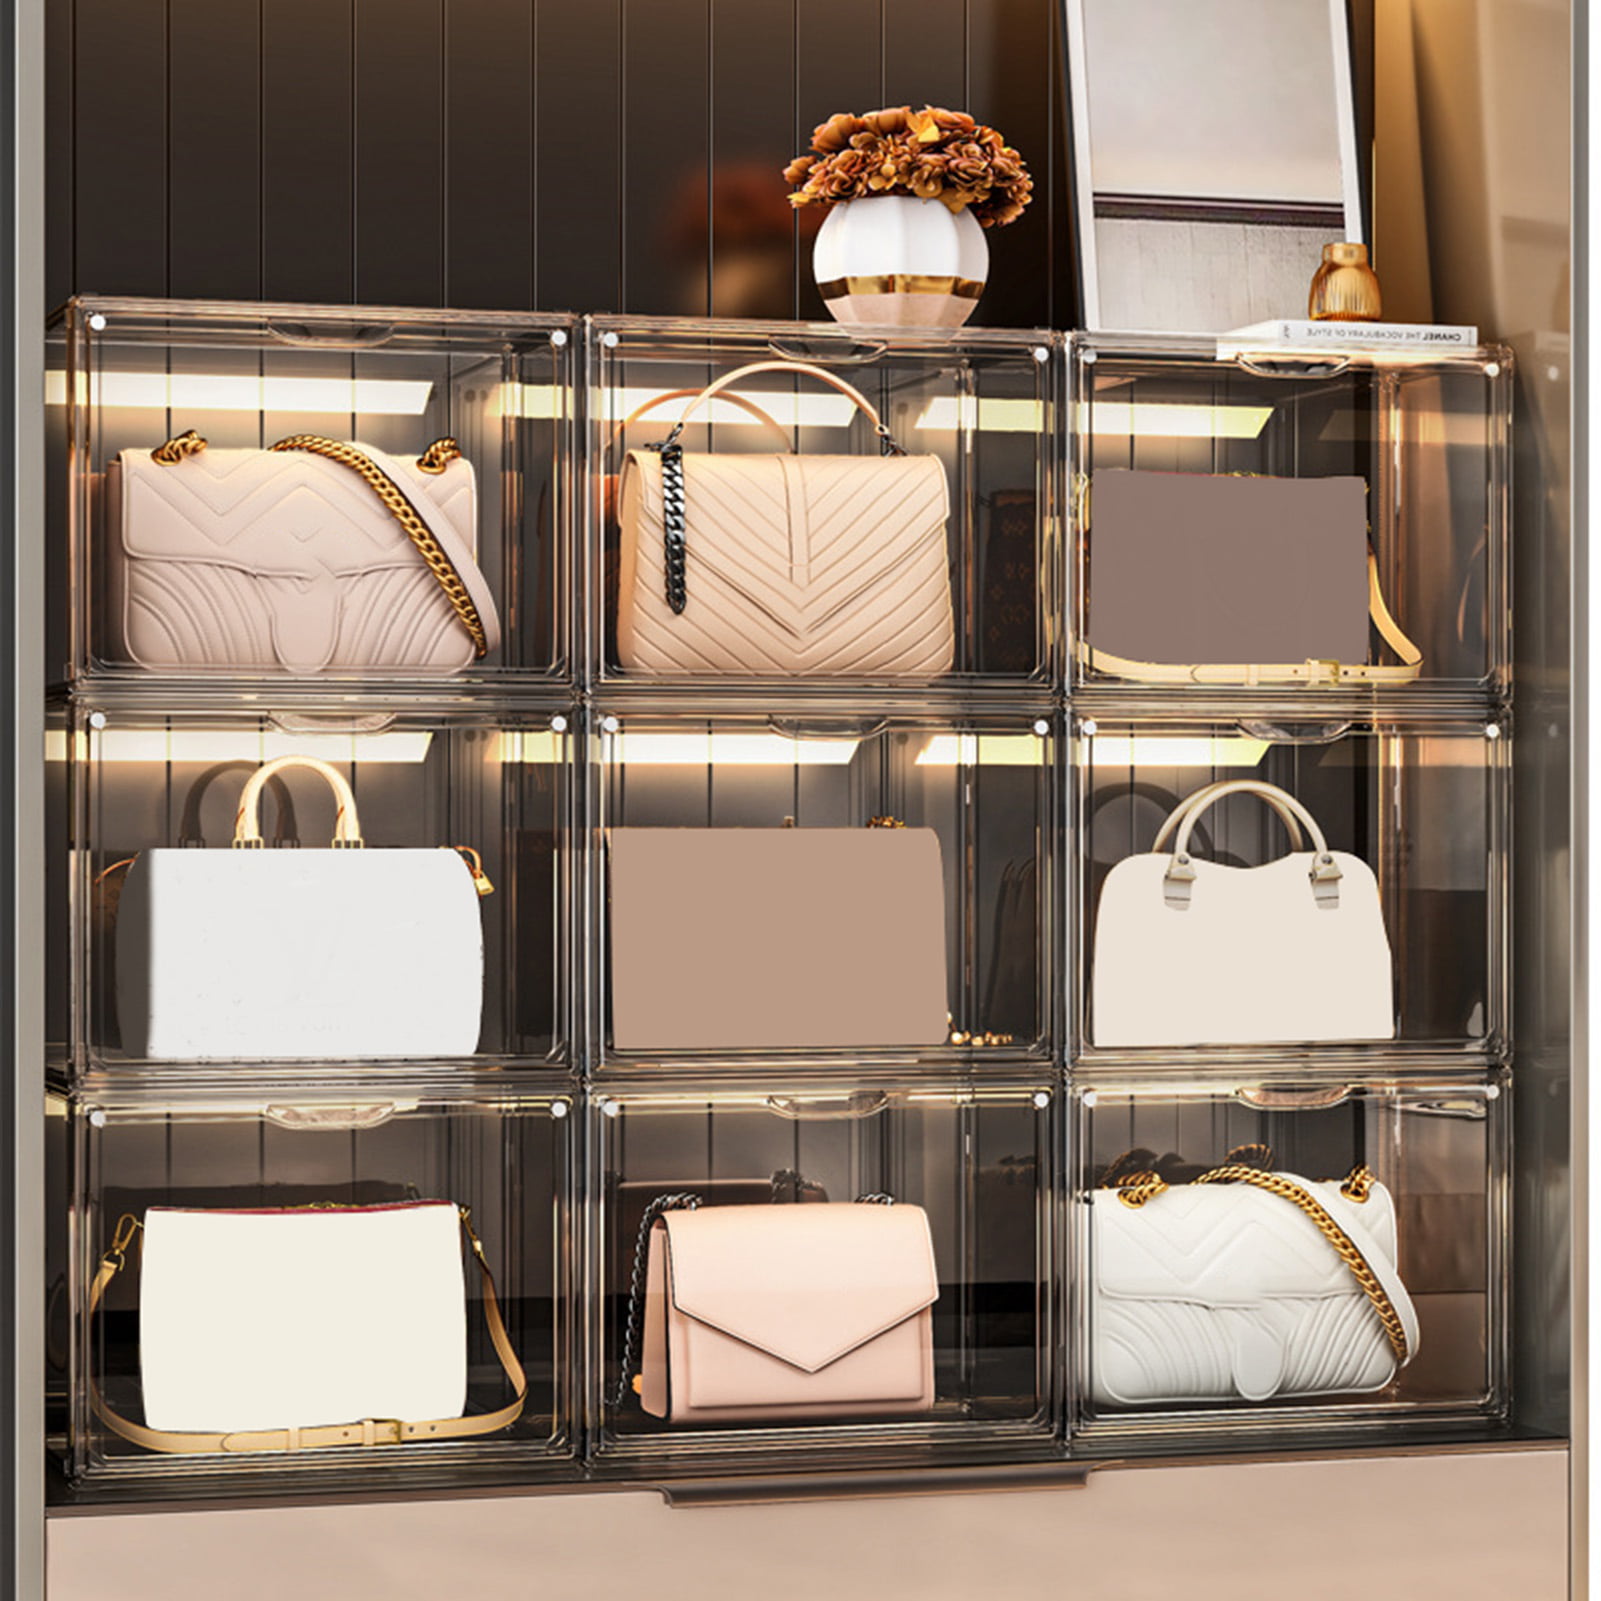 How to Store Your Hermès Handbag | Madison Avenue Couture